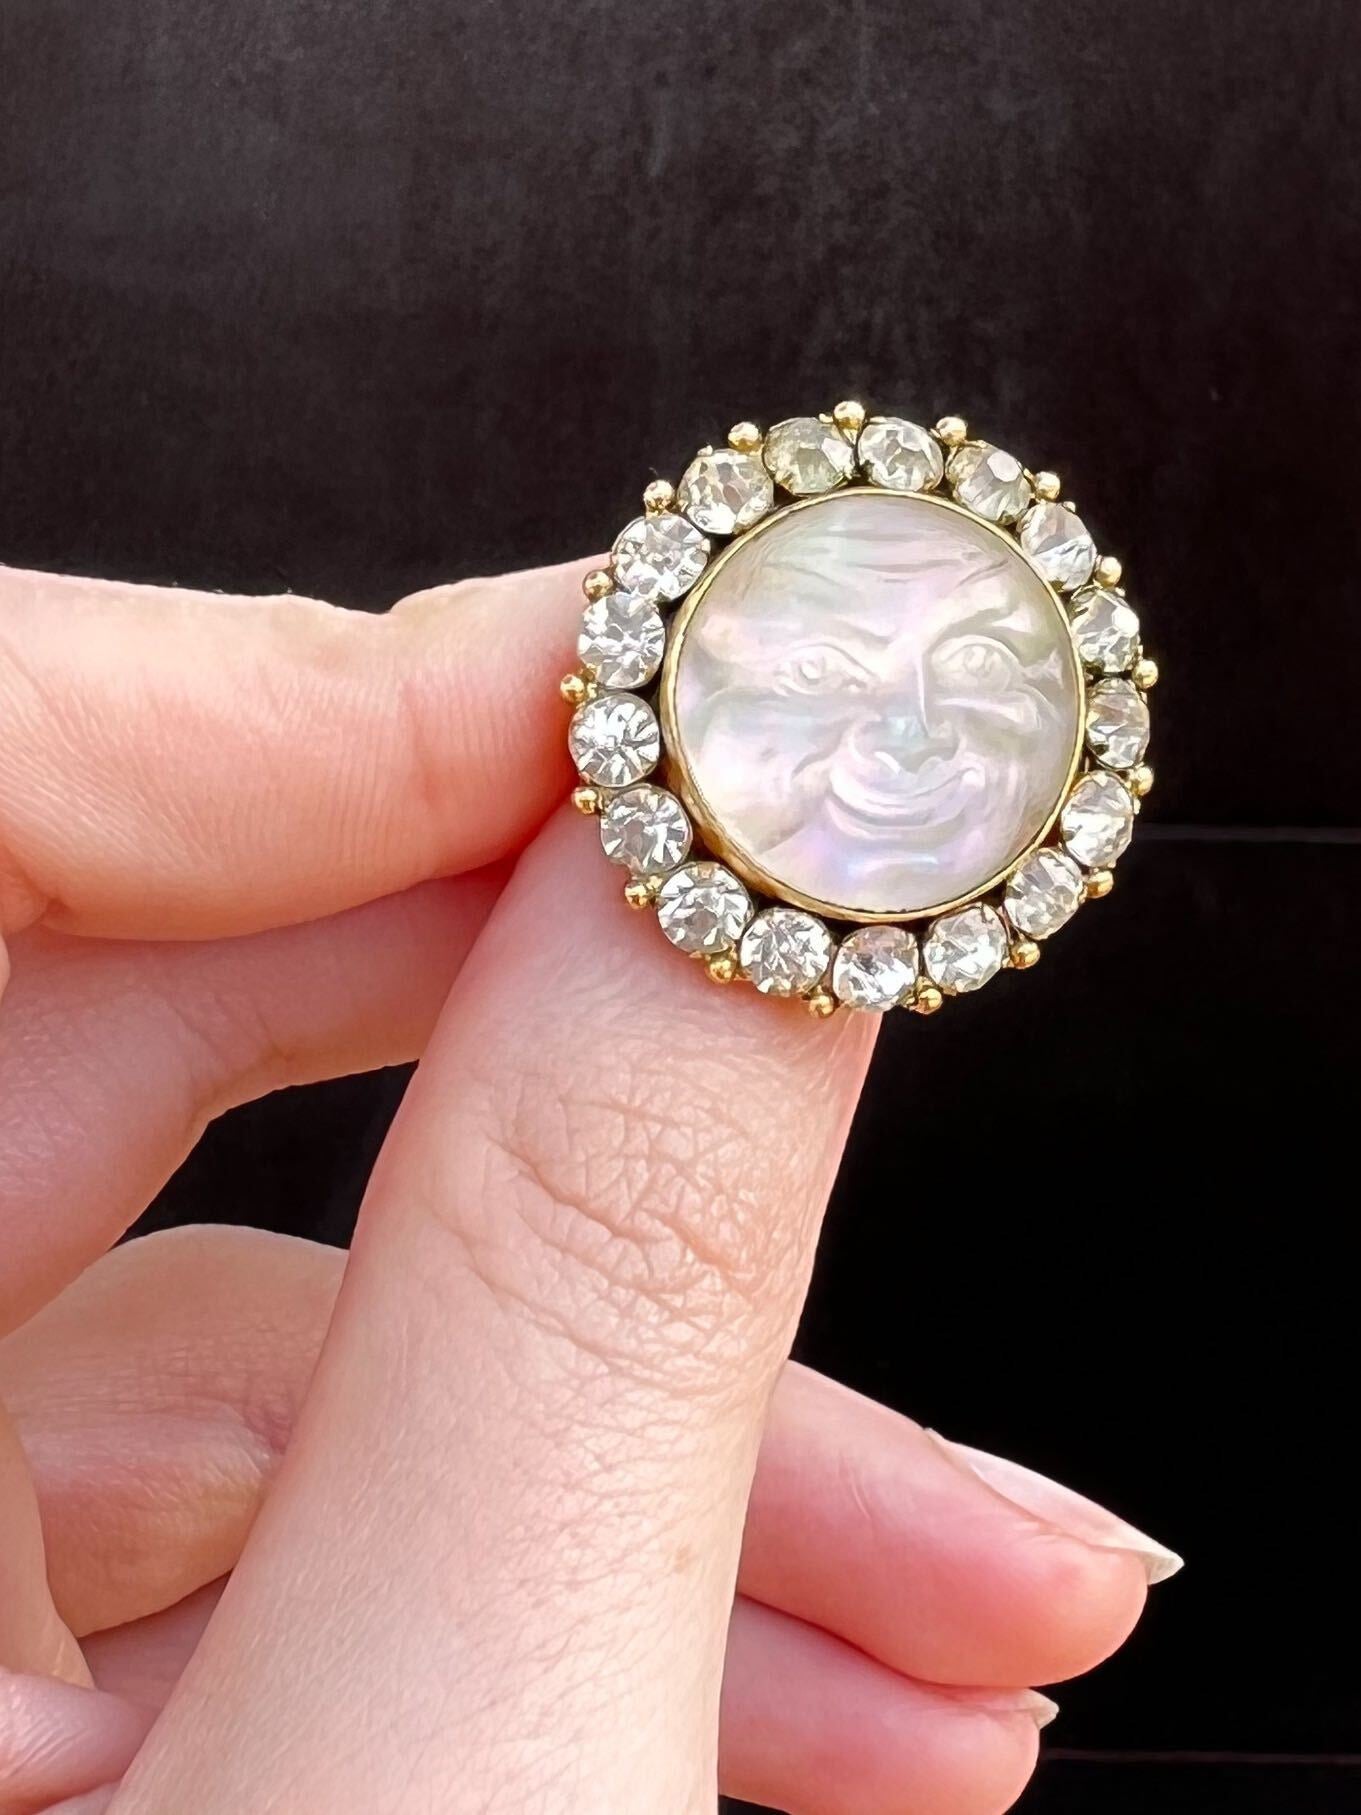 Superb Luminescent “Man in the Moon” Brooch